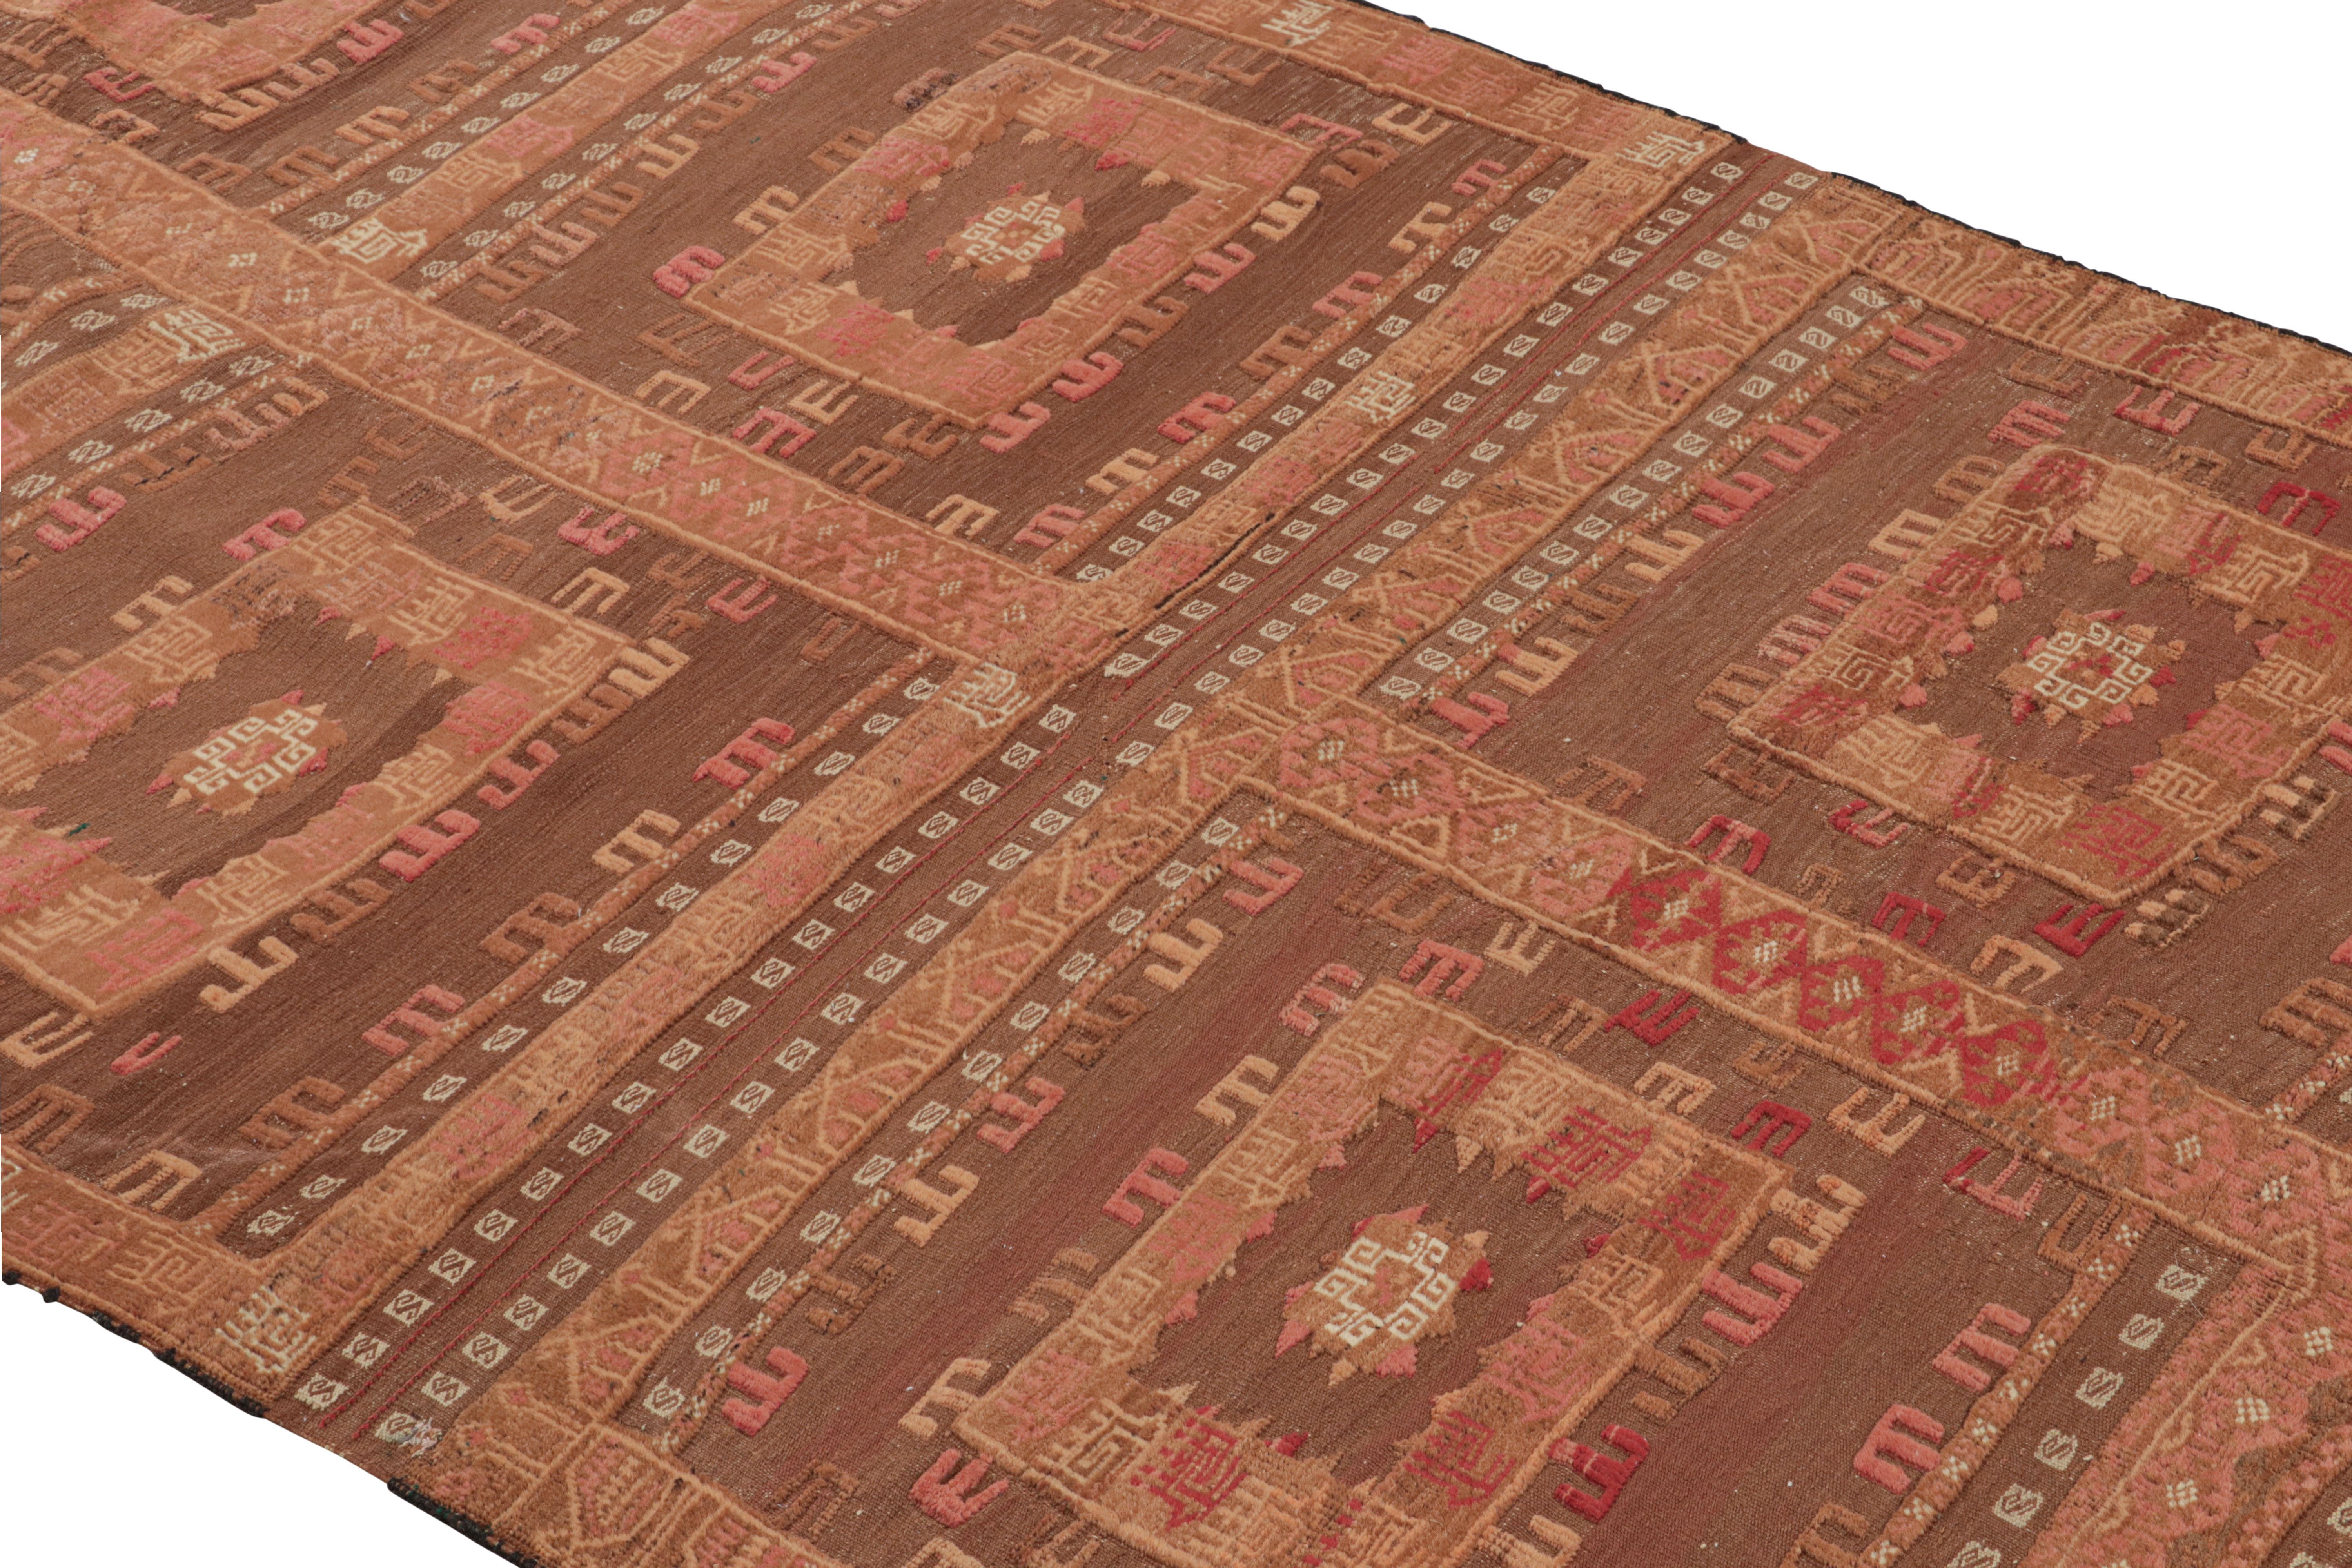 A vintage 4x9 Kilim rug in beige-brown and pink, handwoven in wool originating from Afghanistan circa 1950-1960. Enjoying a unique marriage of pile and flat weave techniques lending a textural, high-low depth to the tribal geometry.

Further on